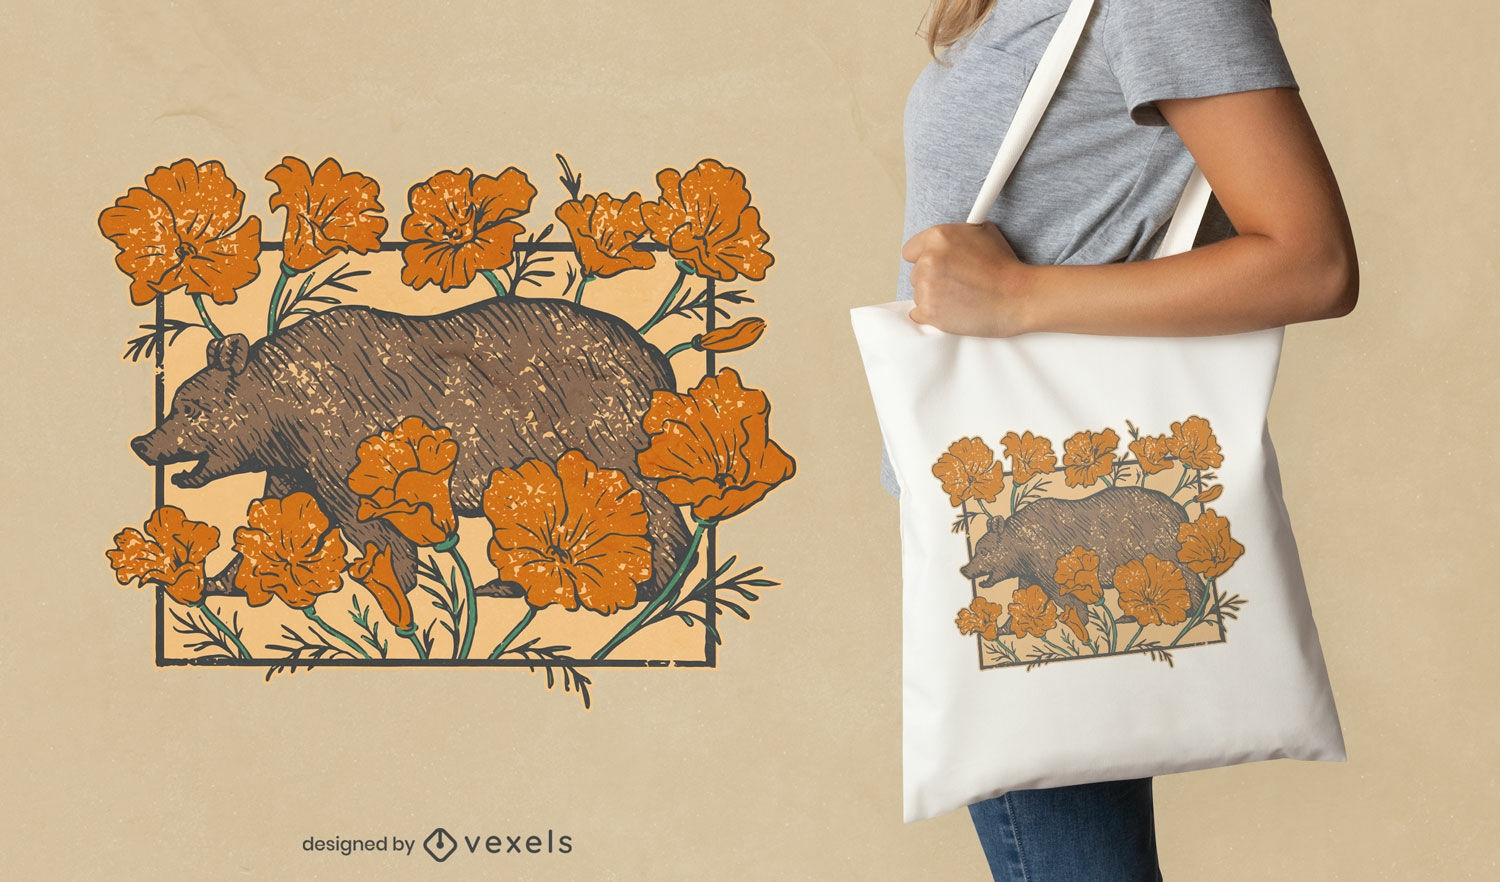 Brown bear with flowers tote bag design